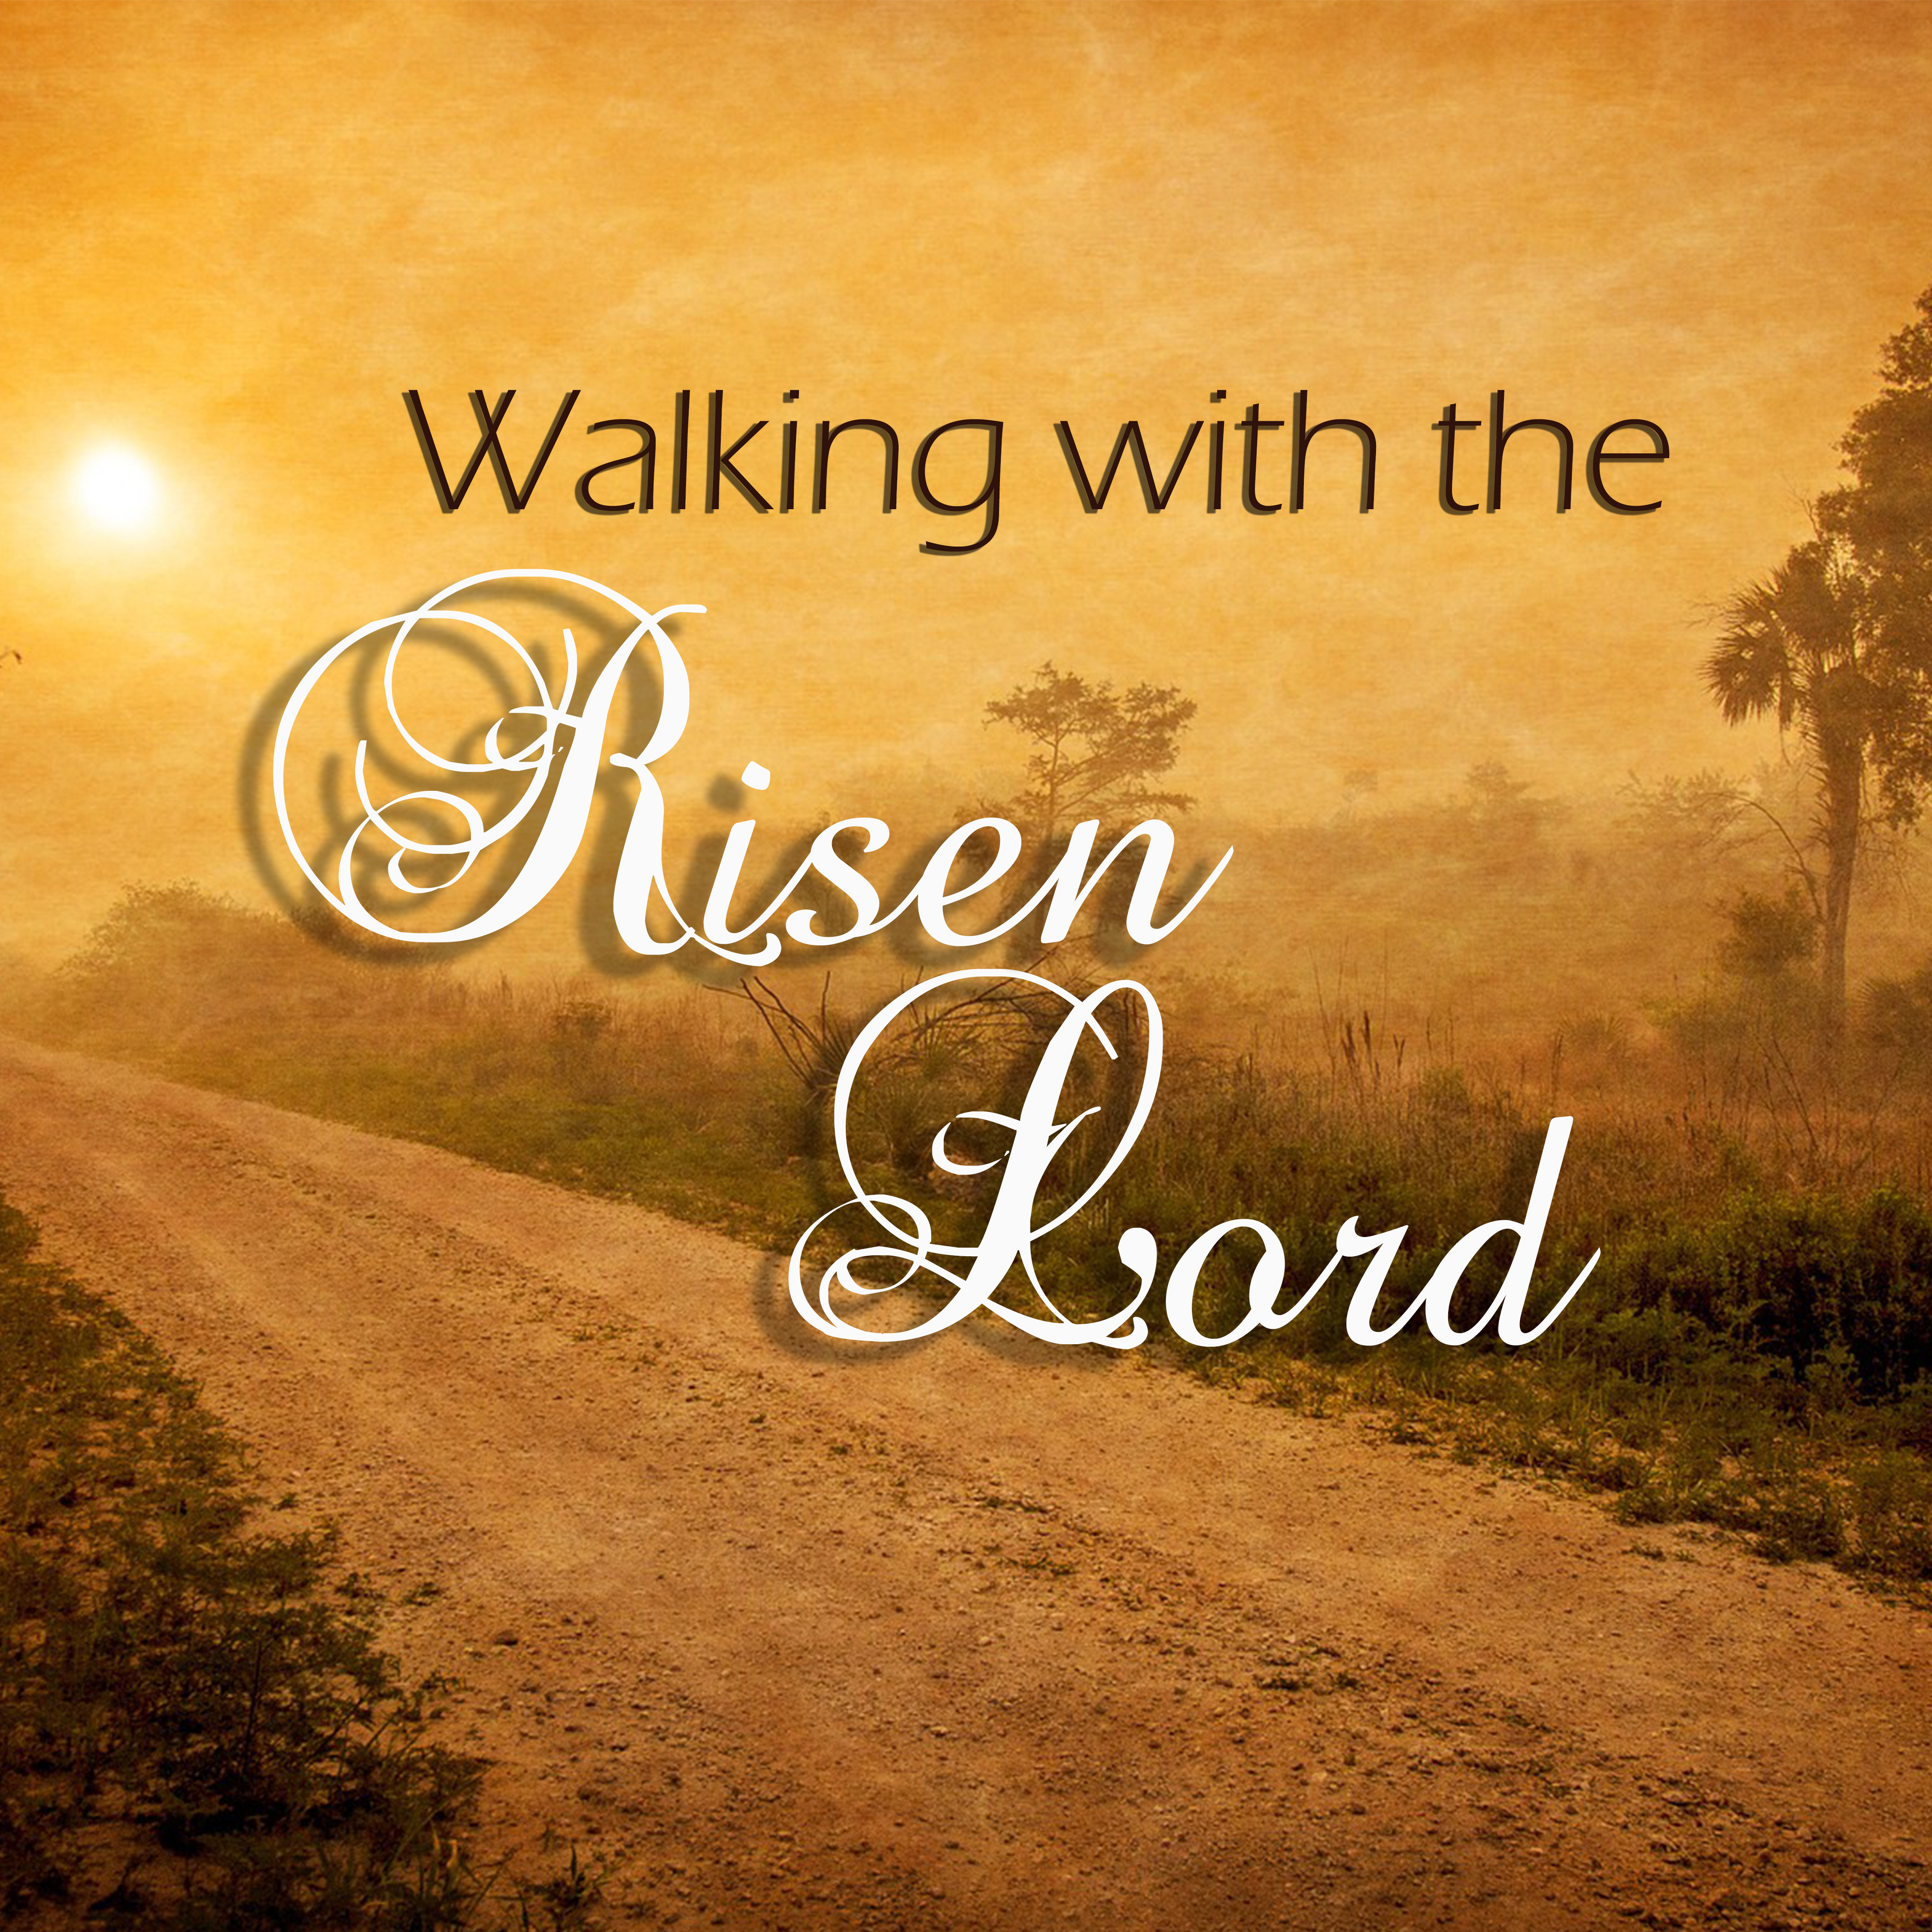 Walking with the Risen Lord